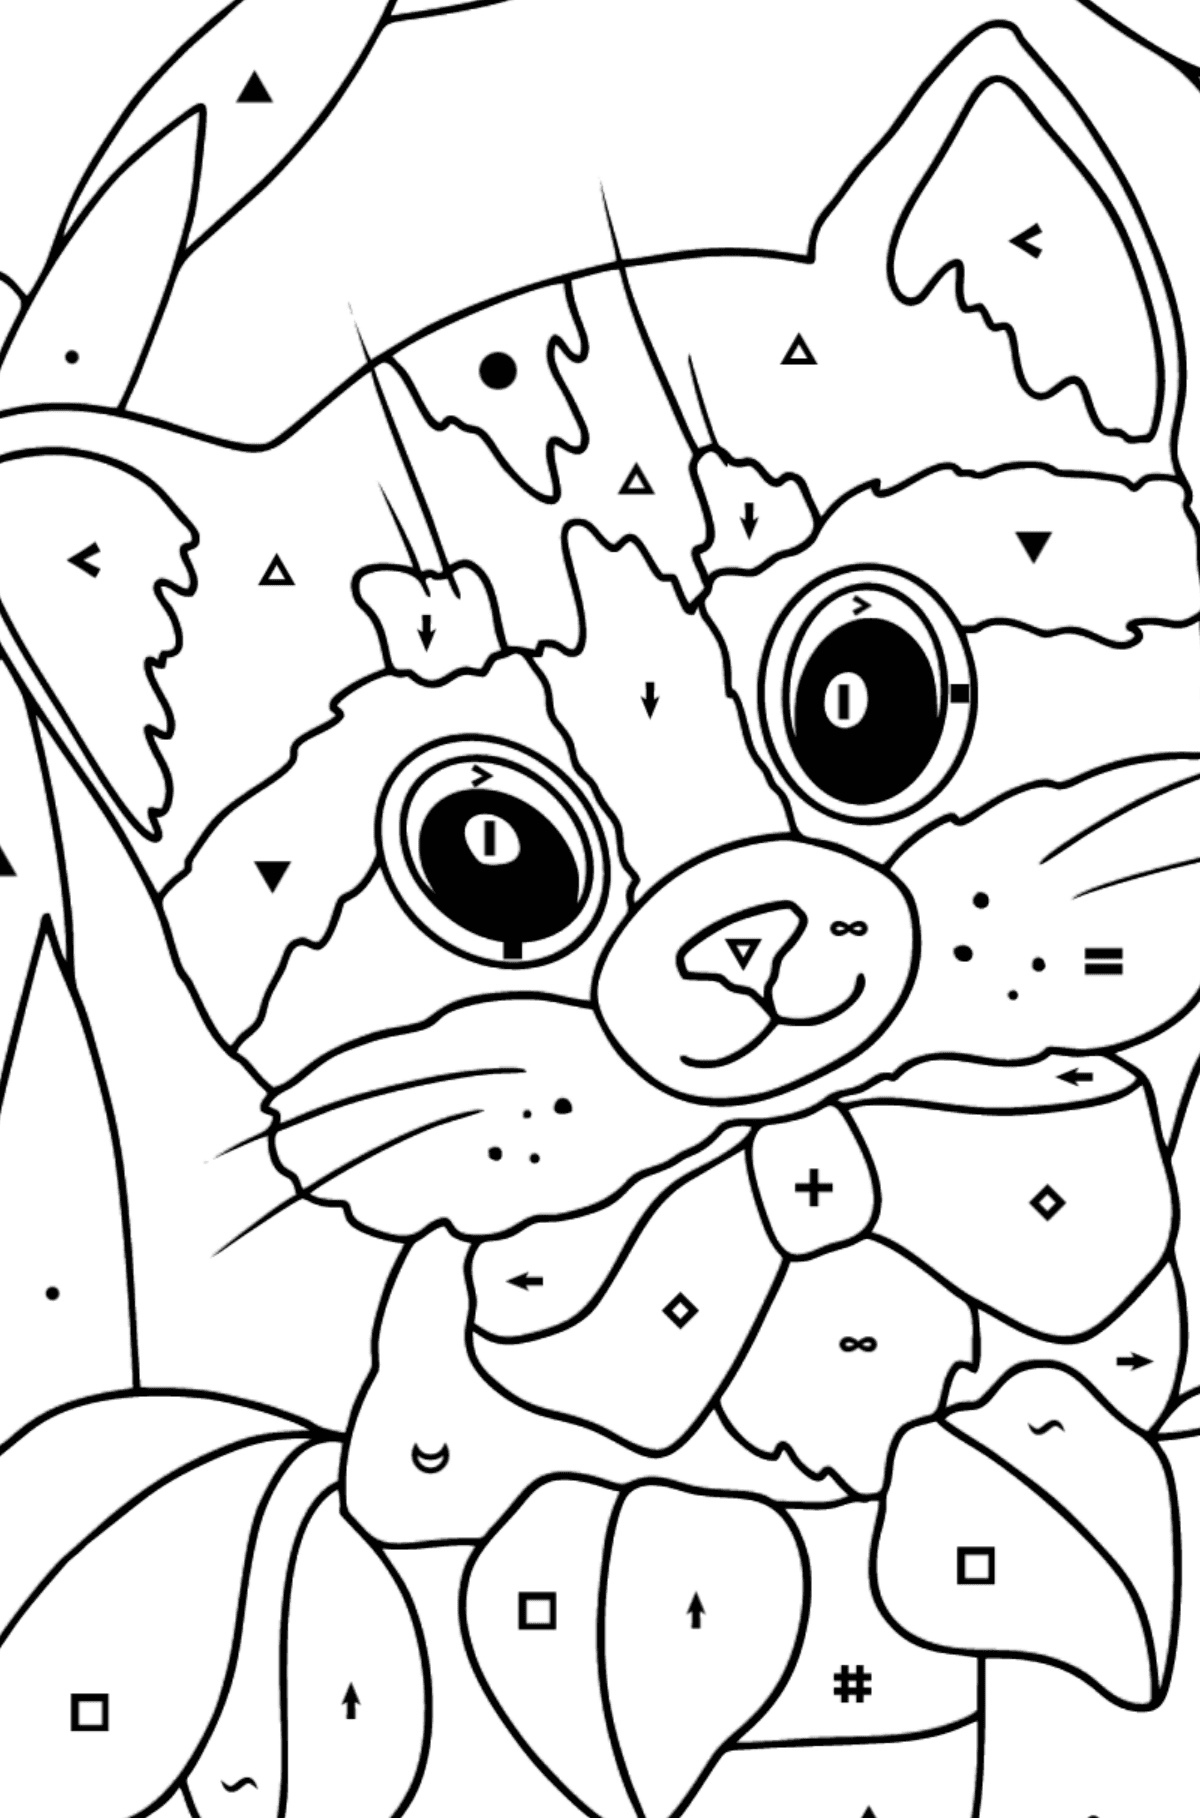 Kitten in a Basket coloring page - Coloring by Symbols for Kids